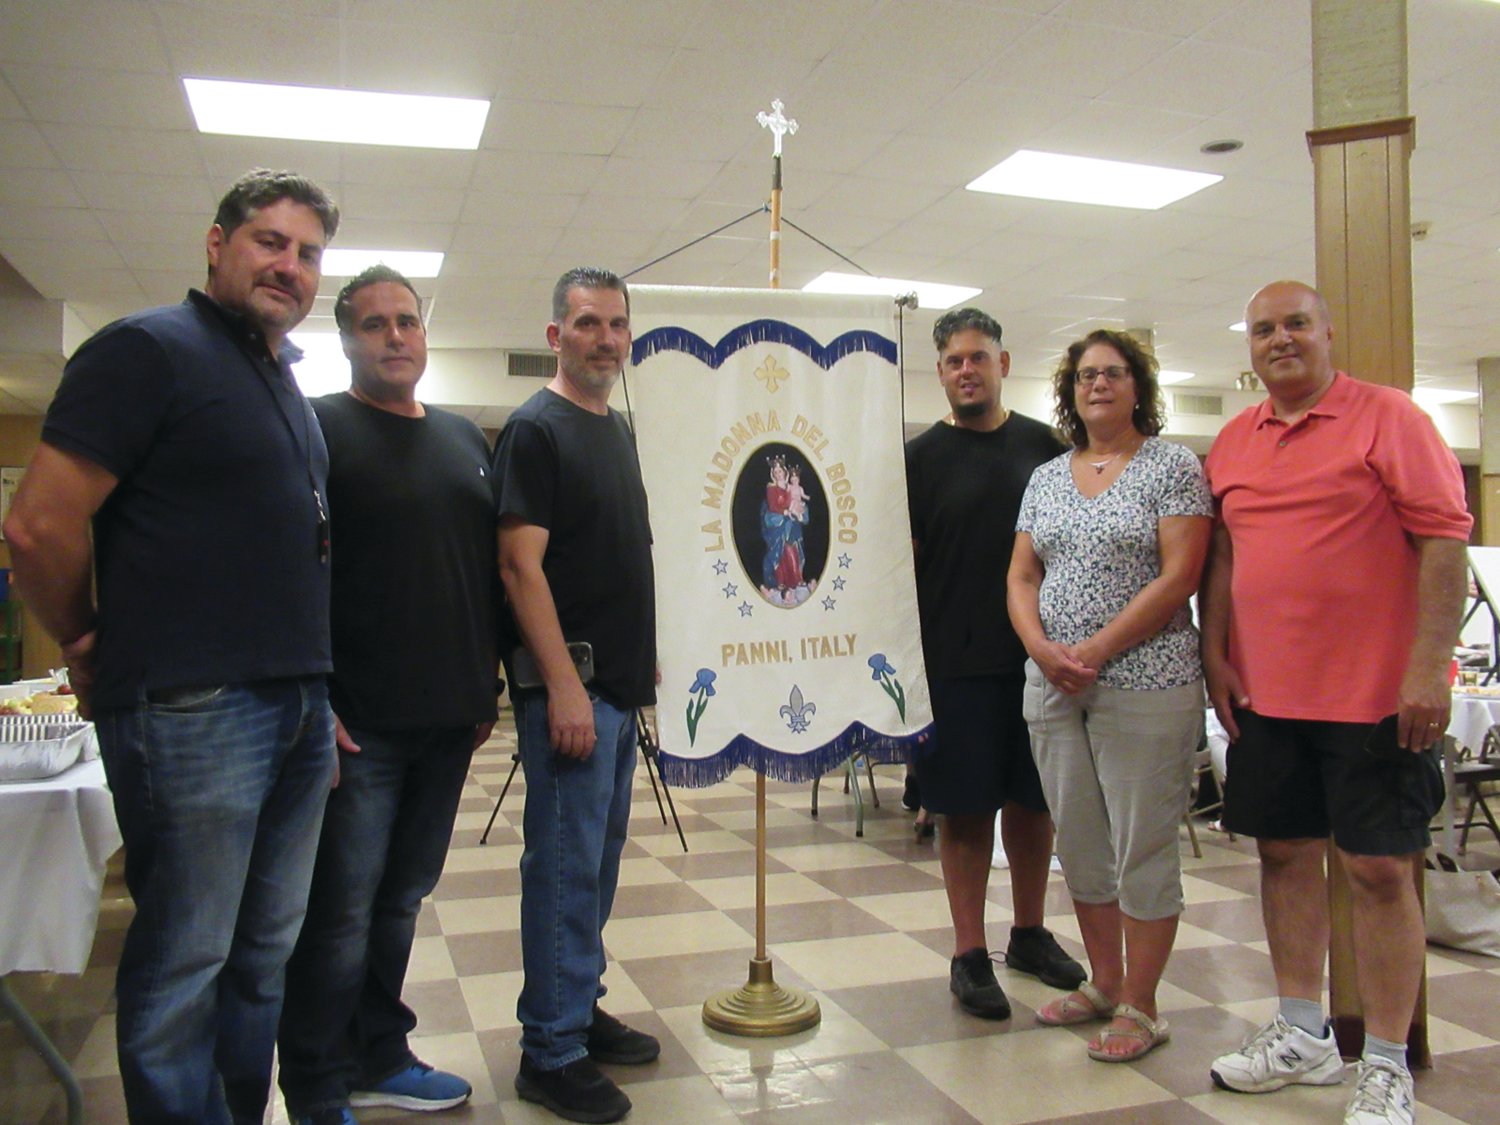 PPROU PANNESE PEOPLE: Among the officers who helped make the recent Paint and Vino Night a huge success were Steve Russo, Jason Parenteau, David Venditelli, PJ, Andrea Paglia and Lou Mansolillo.